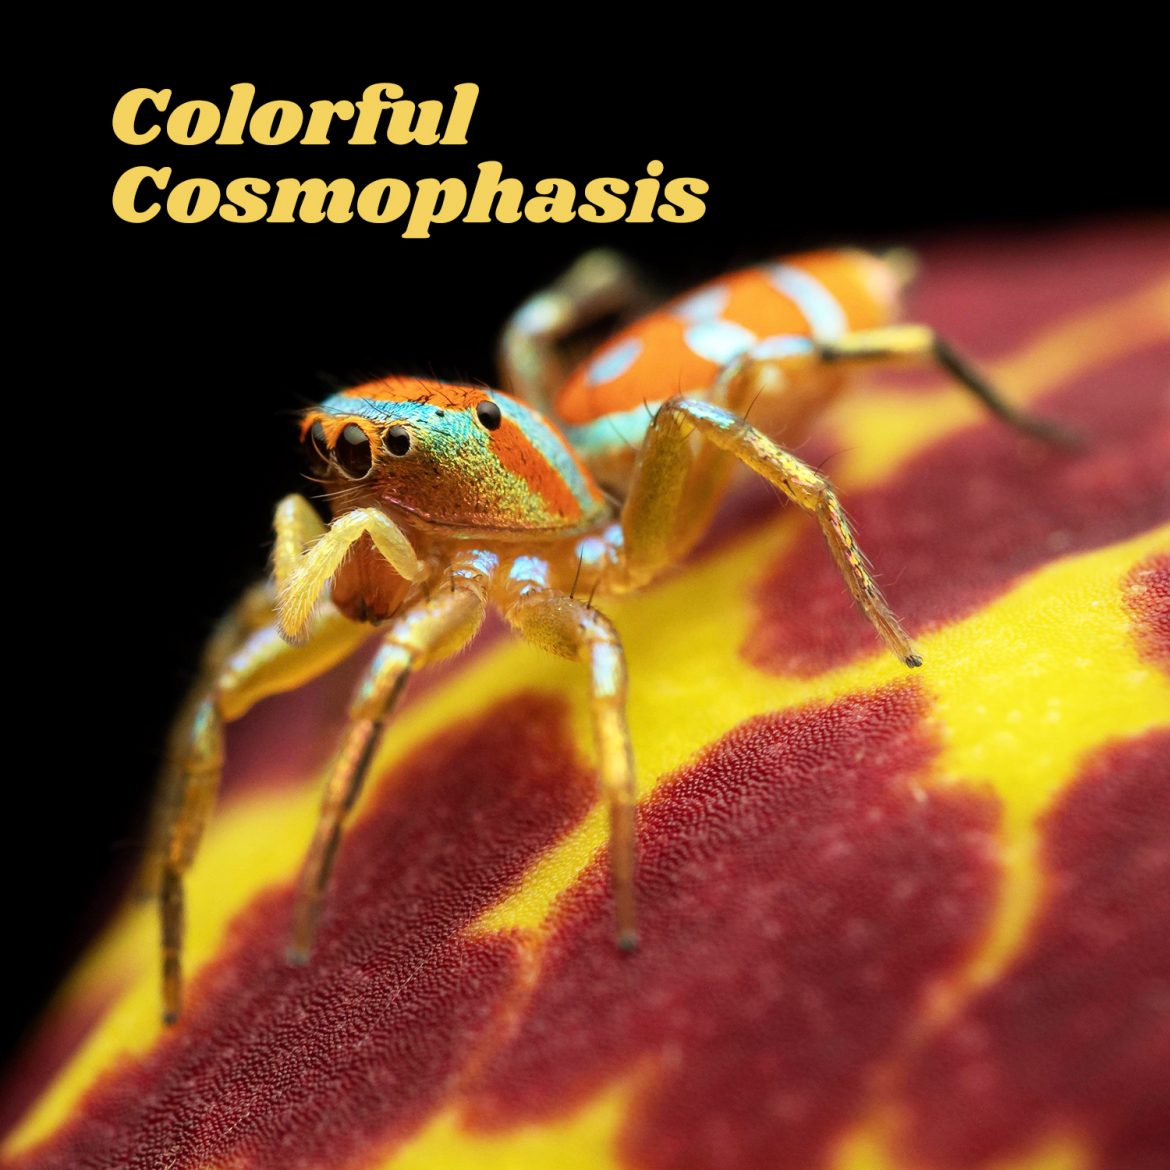 Colorful Cosmophasis